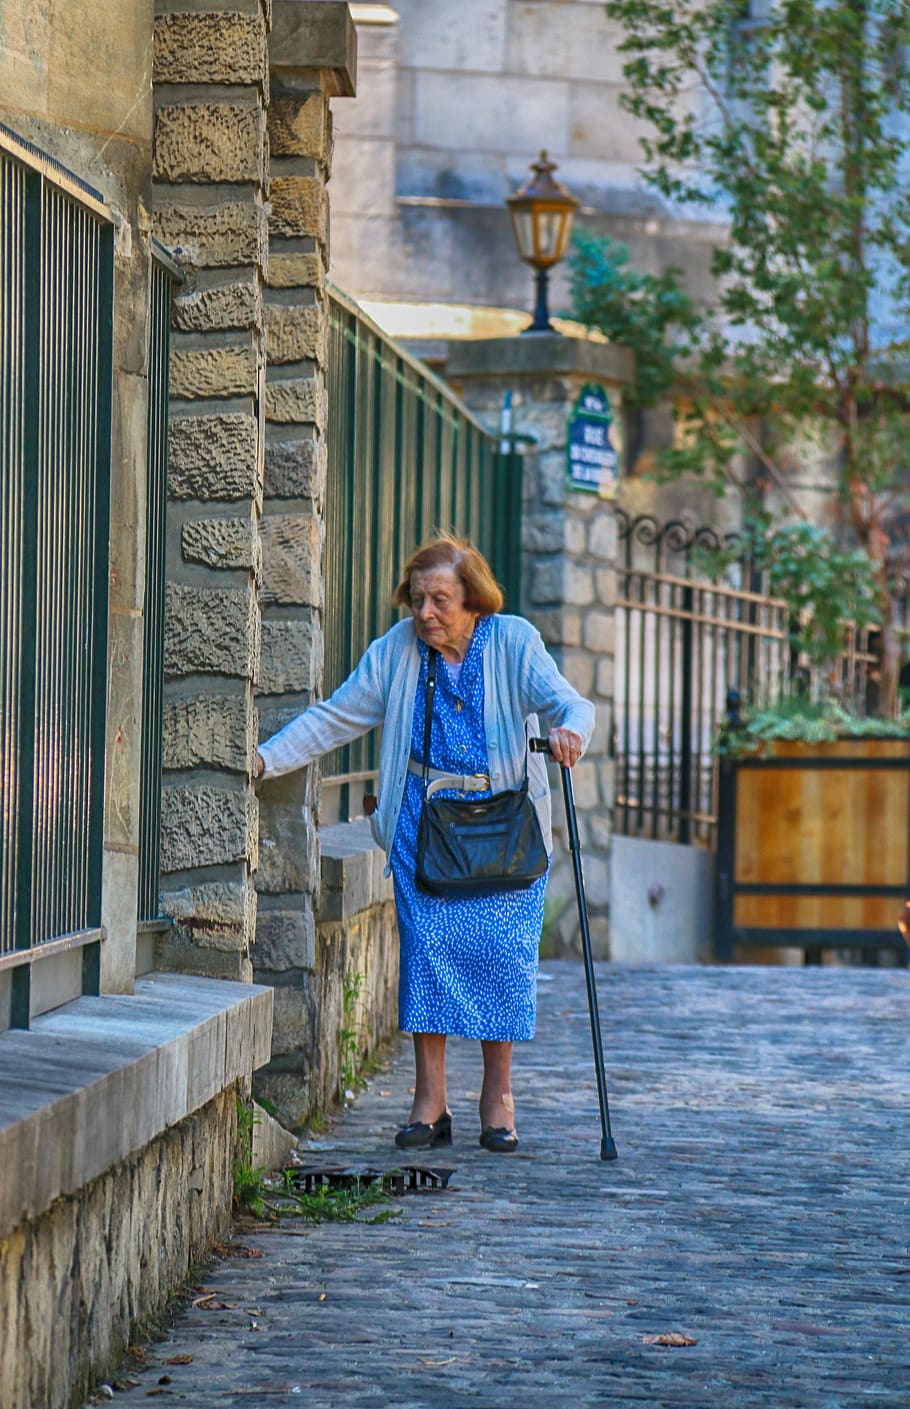 old age, woman, old, solitude, age, vulnerable, difficulties, street, cane, autonomy